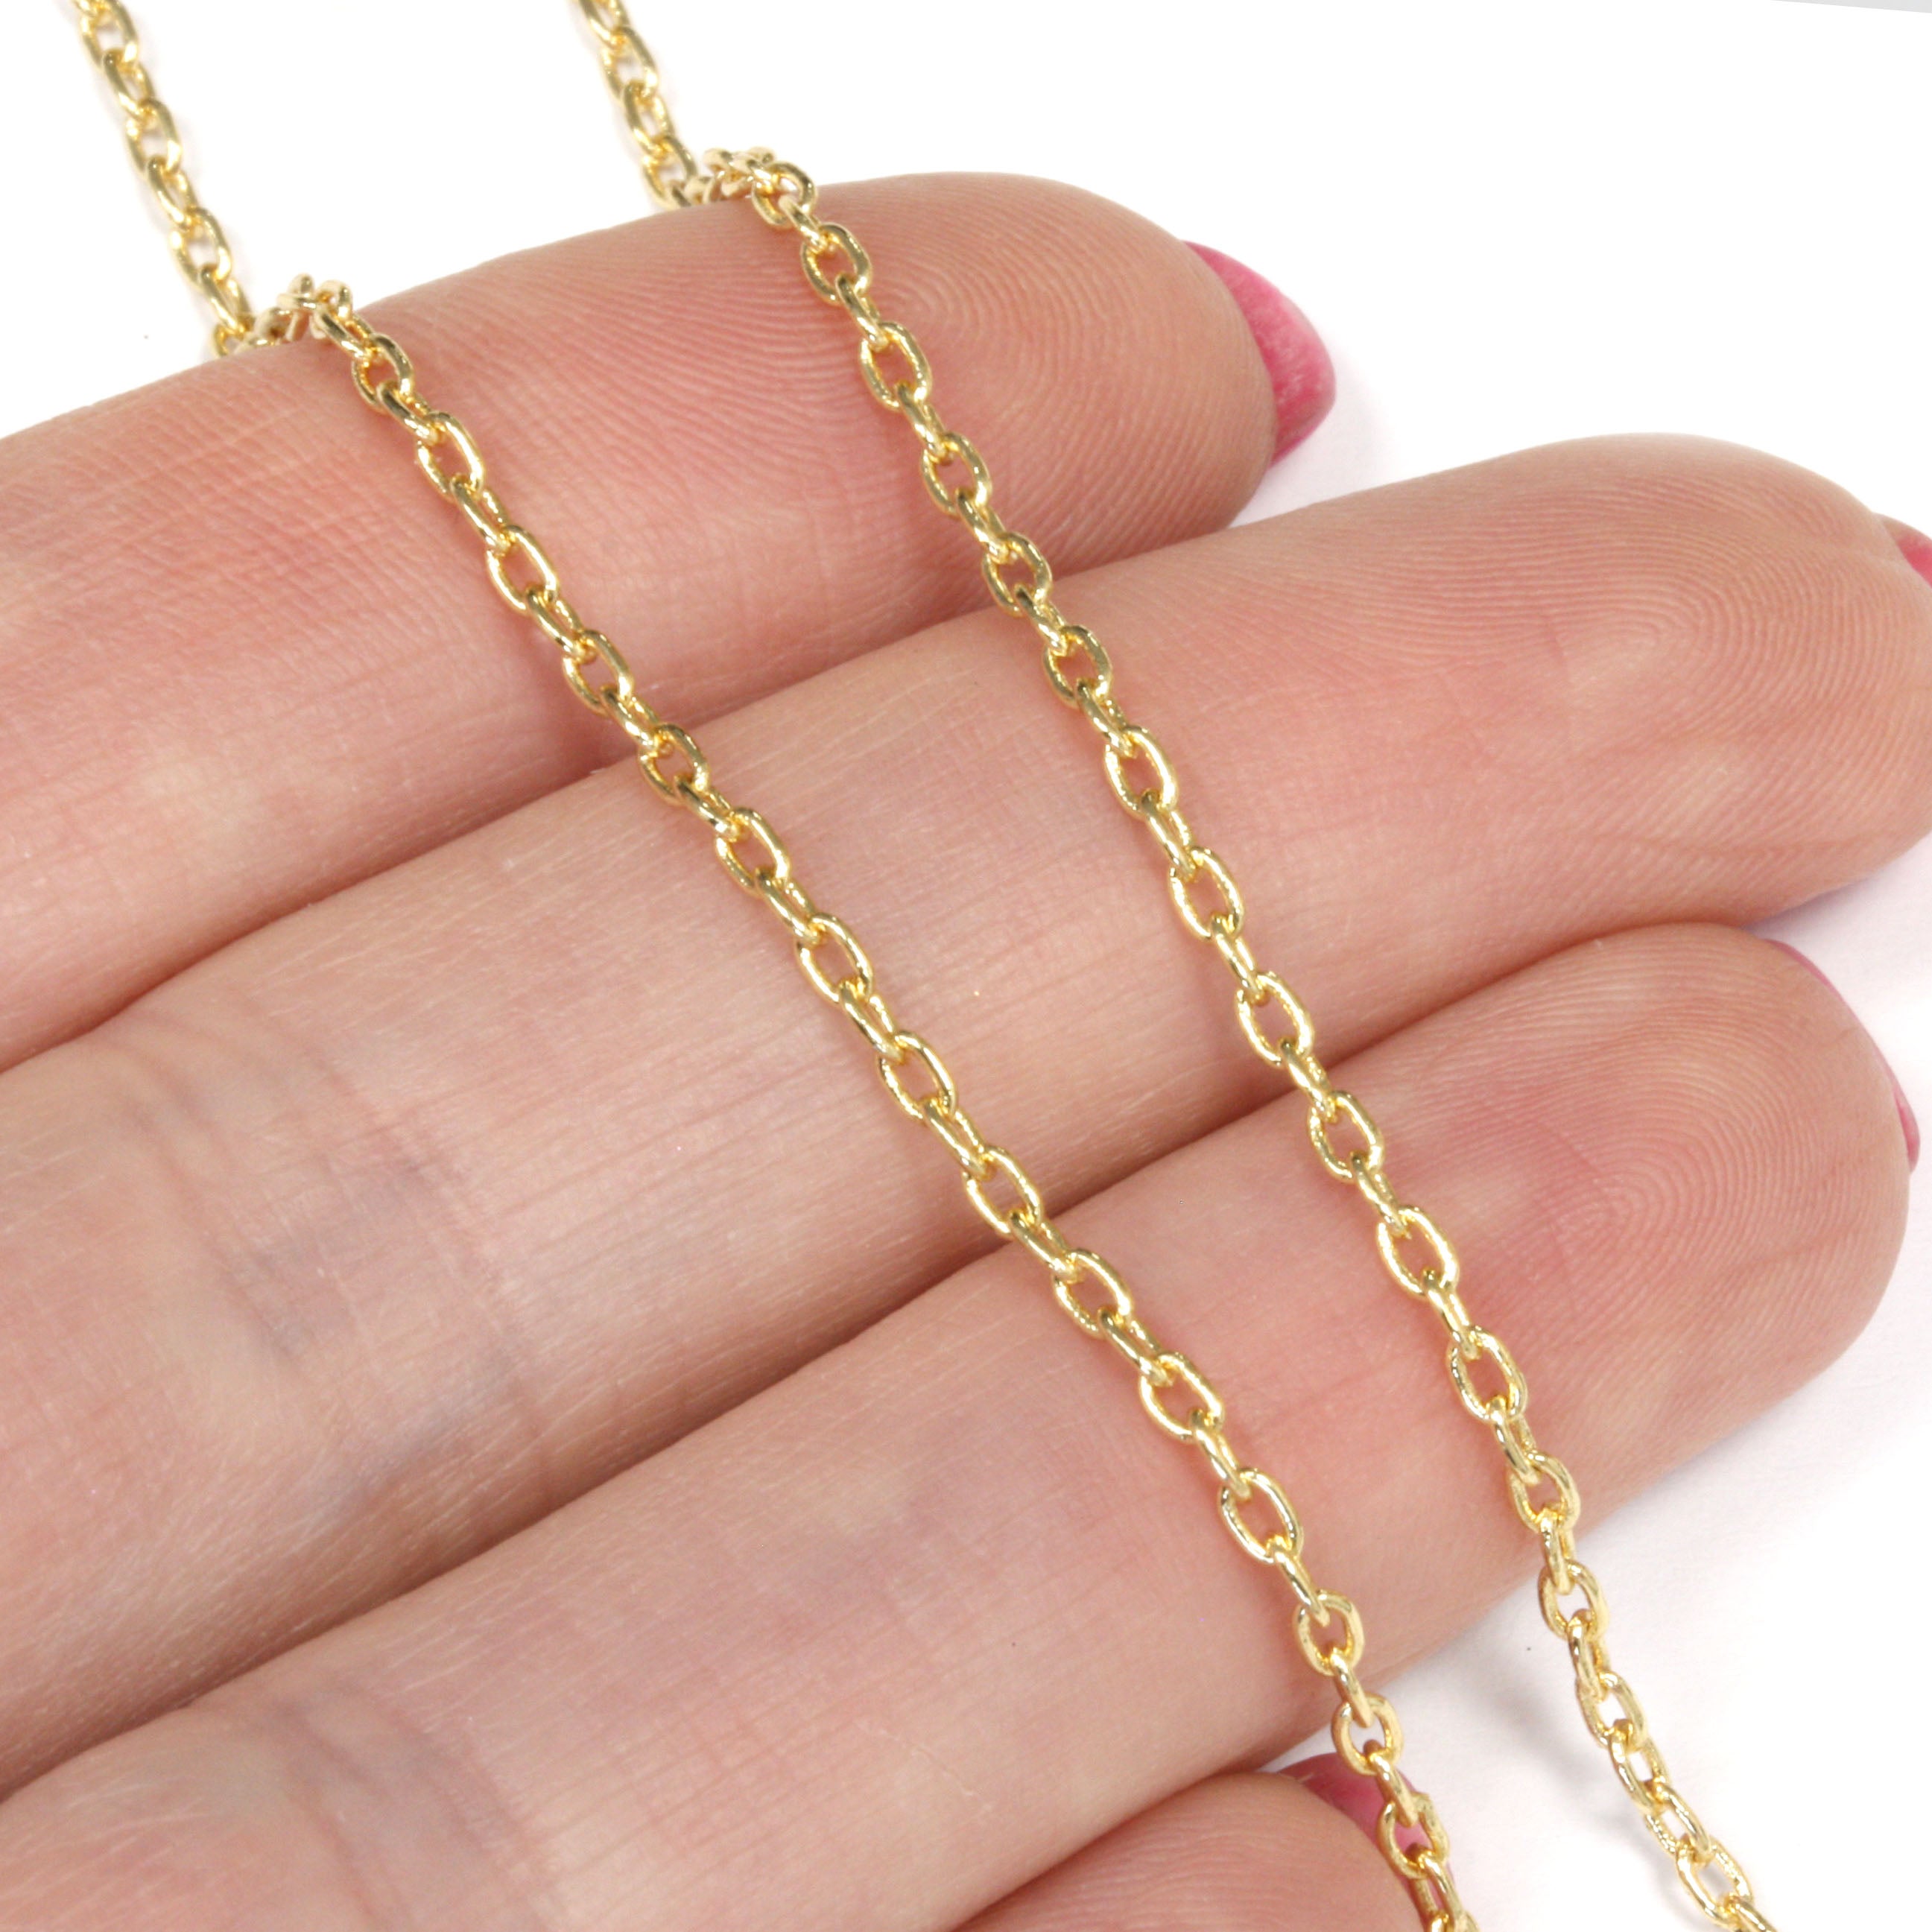 Belcher Chain 18 Gold Plated - Pack of 1